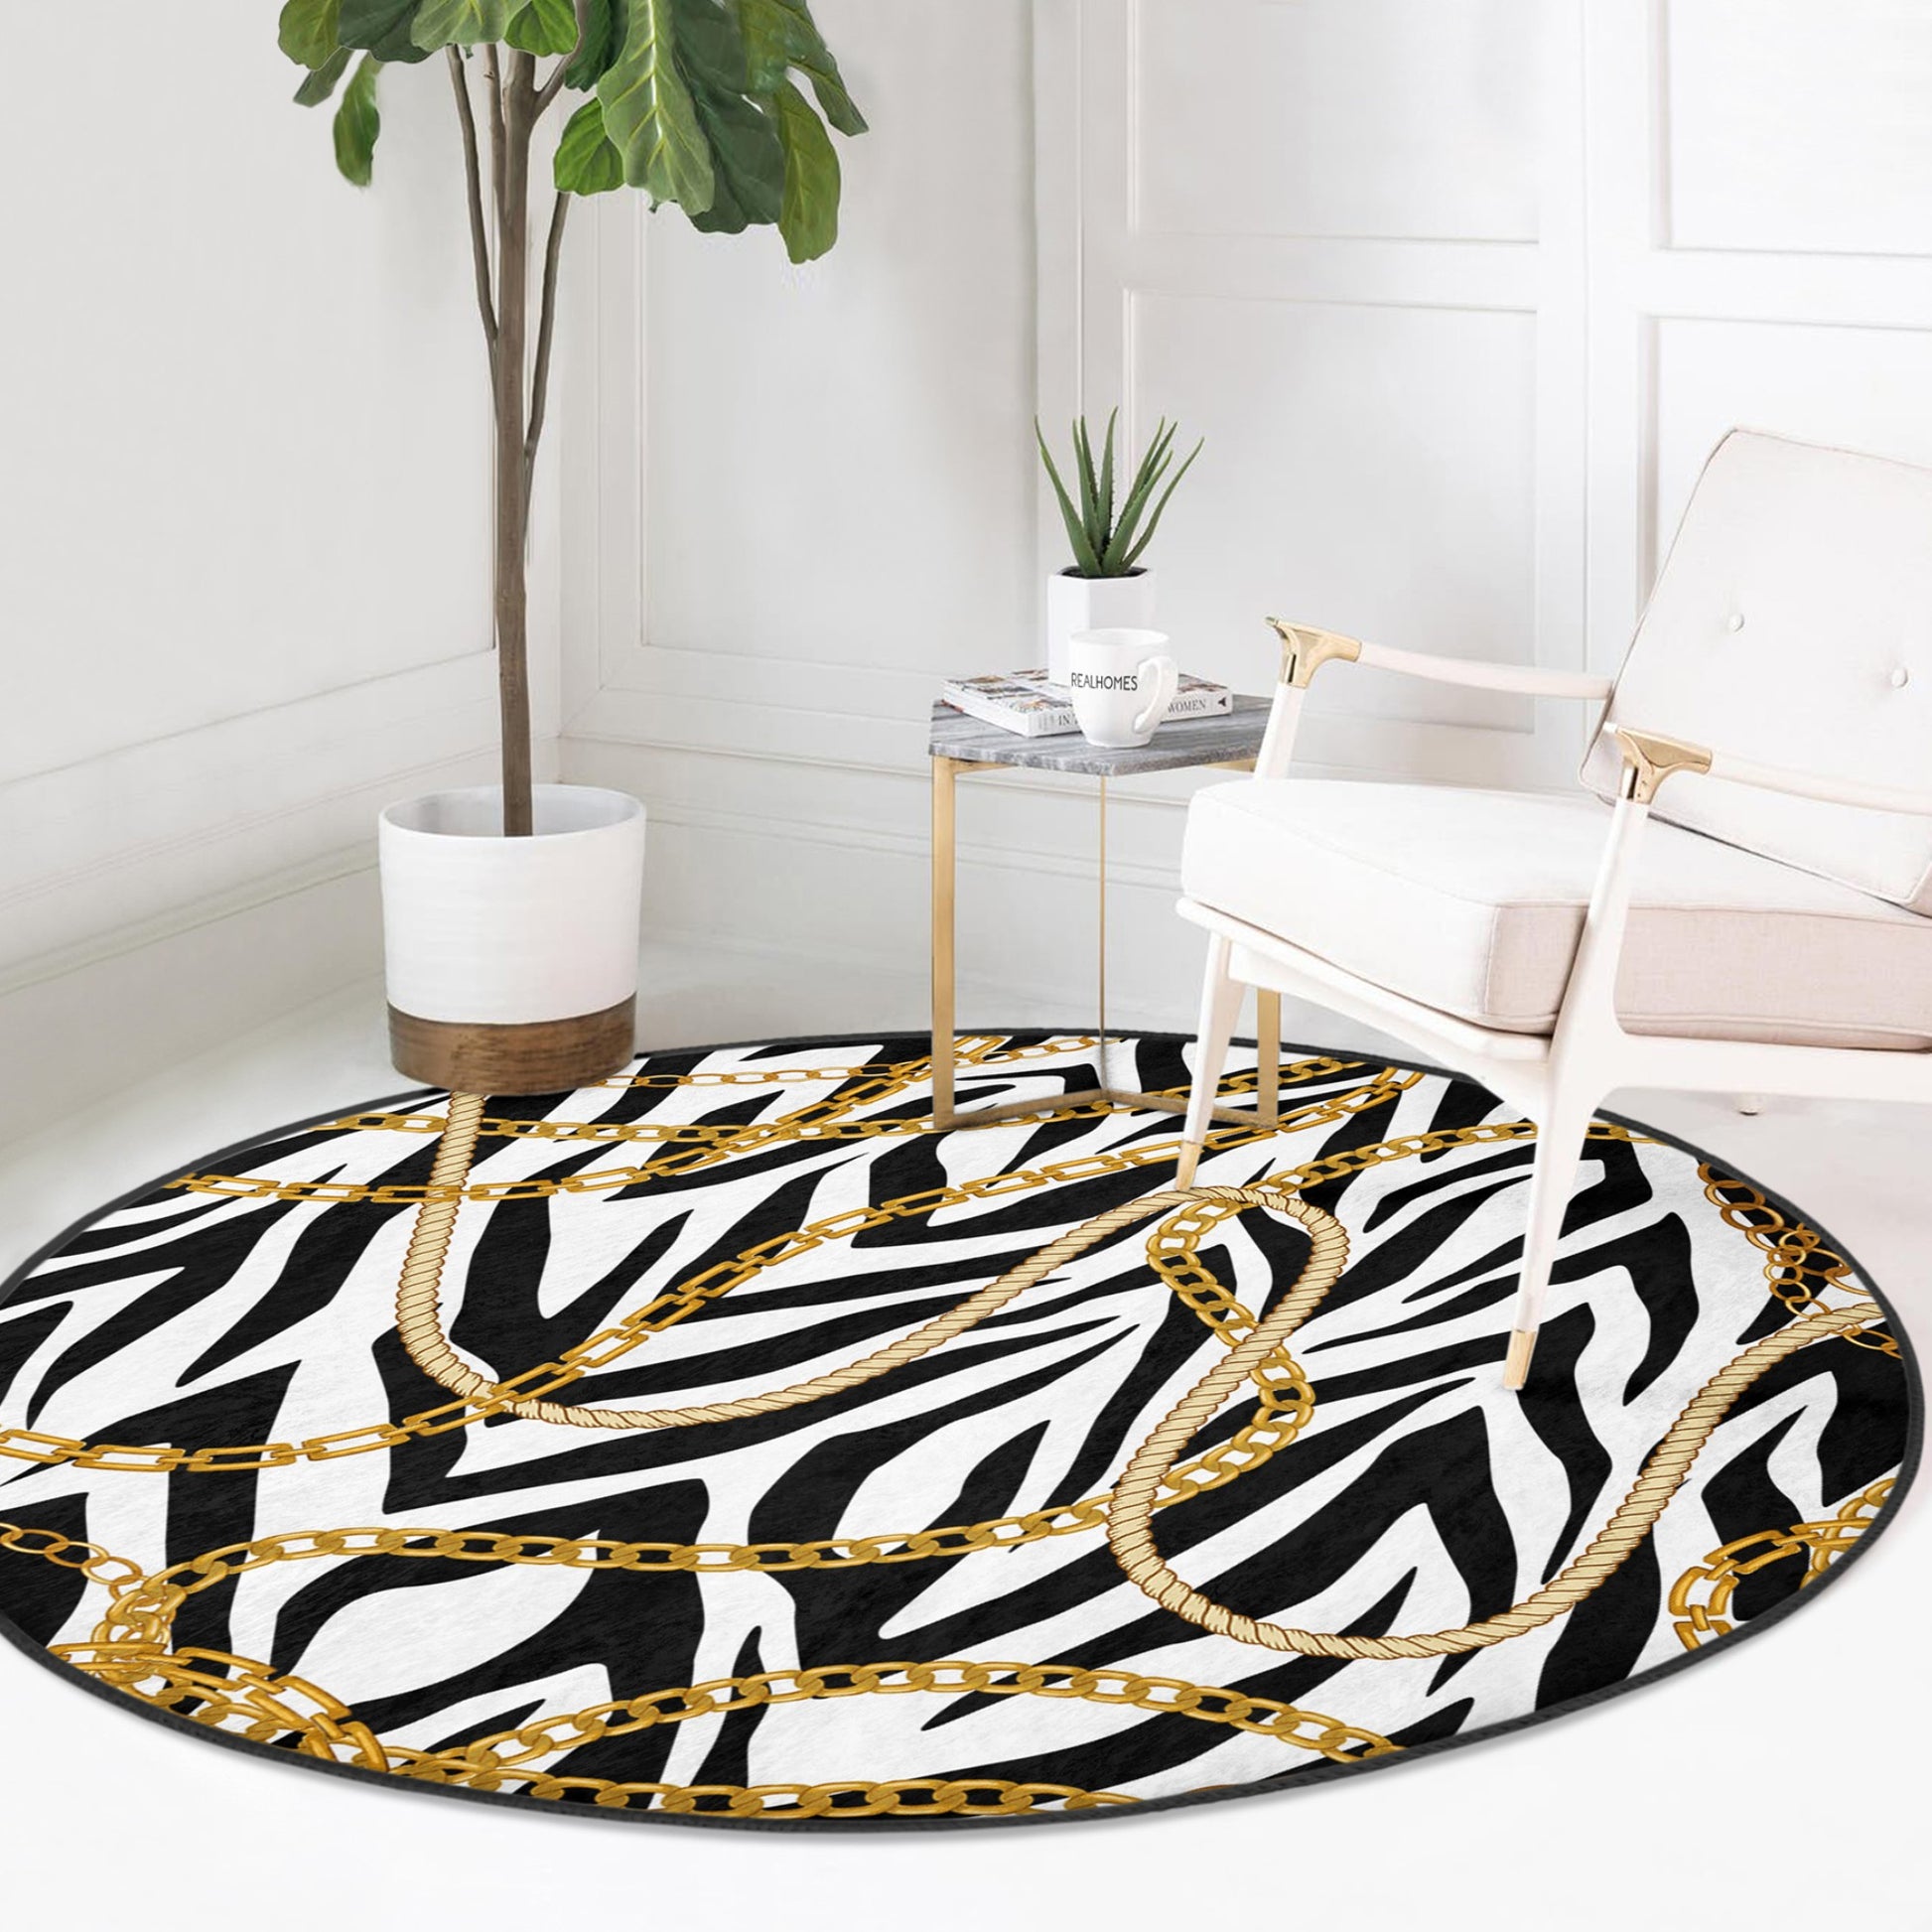 Round Patterned Floor Rug - Chic Living Room Accent